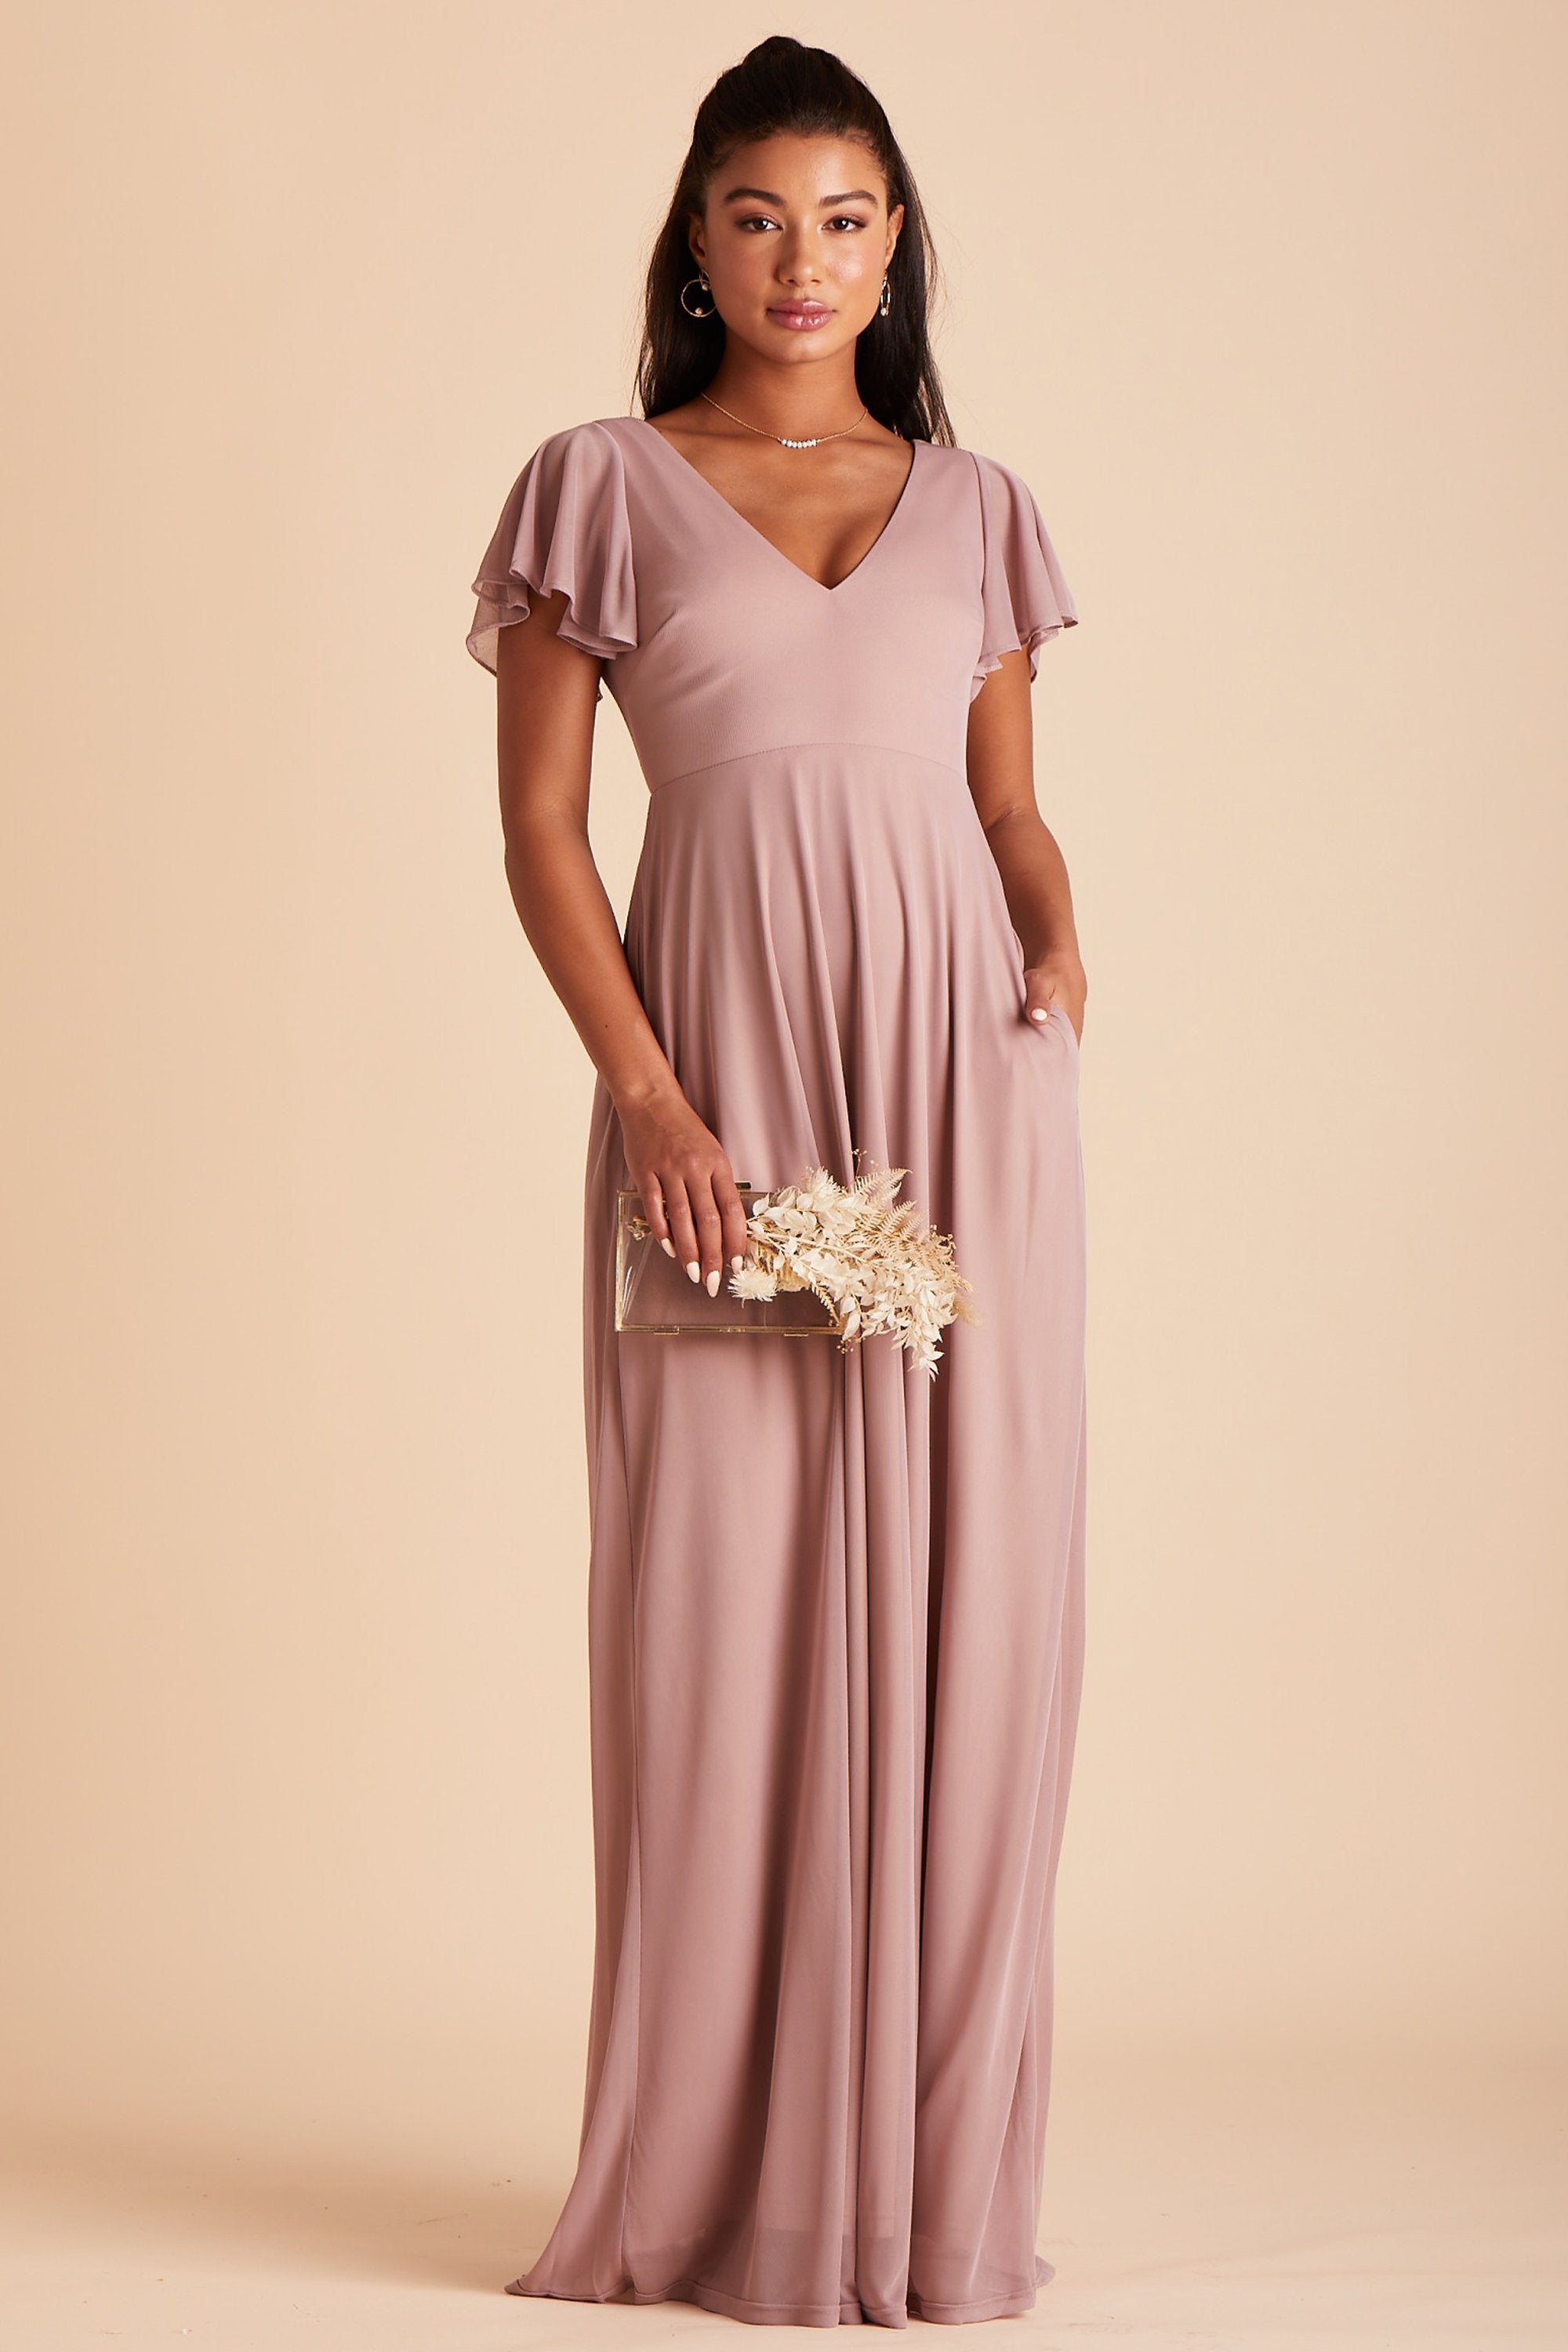 Hannah bridesmaids dress in mauve chiffon by Birdy Grey, front view with hand in pocket